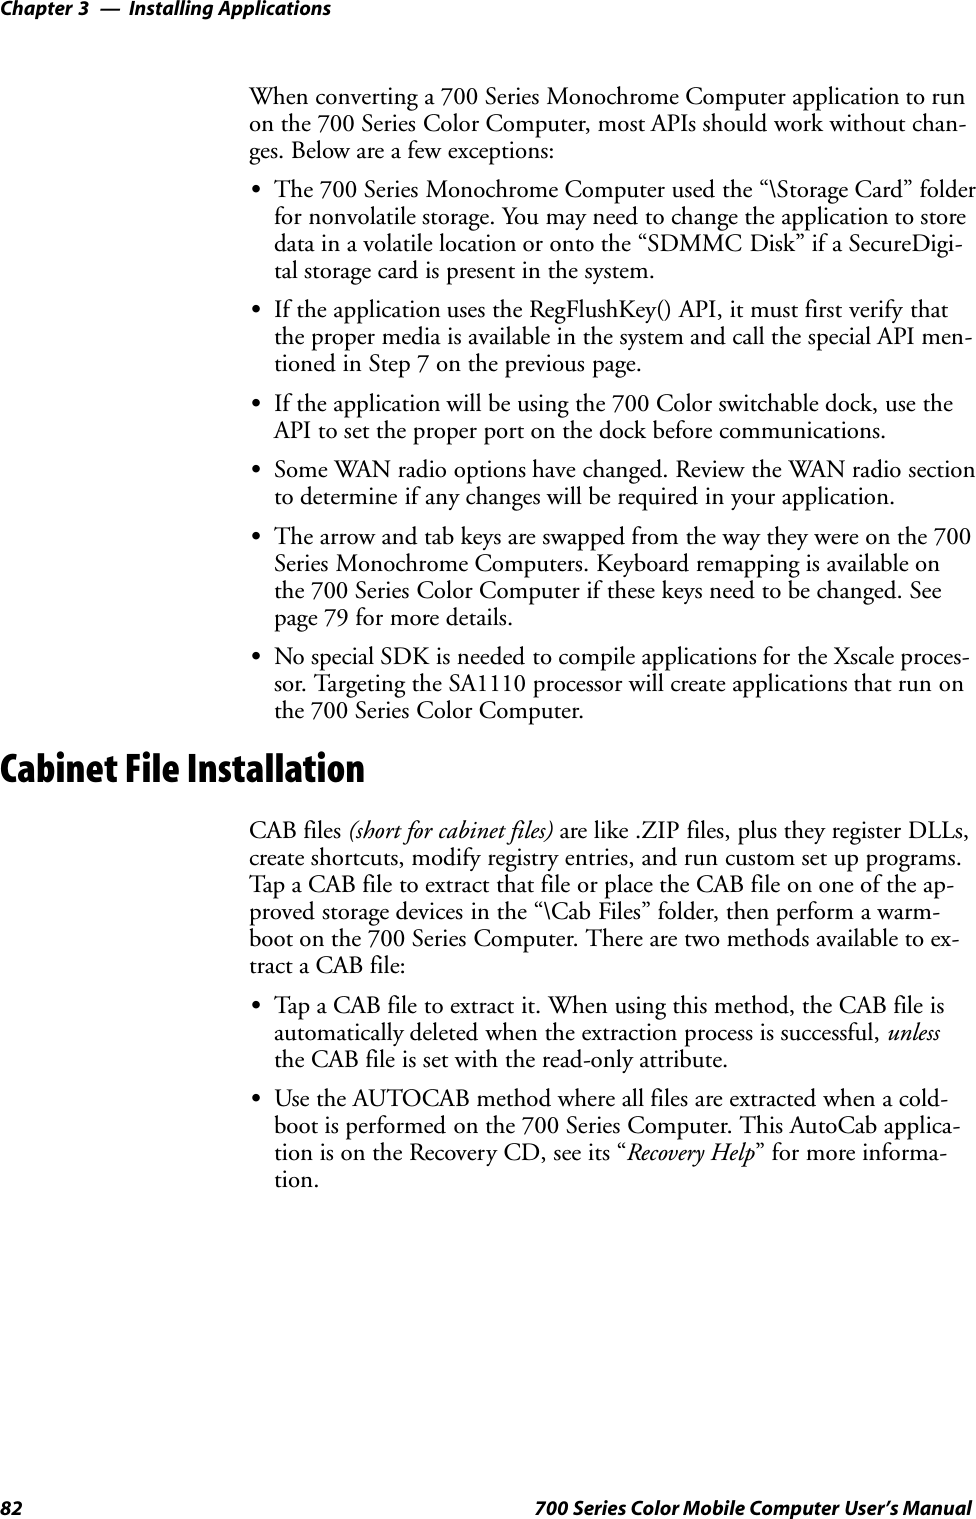 Installing ApplicationsChapter —382 700 Series Color Mobile Computer User’s ManualWhen converting a 700 Series Monochrome Computer application to runon the 700 Series Color Computer, most APIs should work without chan-ges. Below are a few exceptions:SThe 700 Series Monochrome Computer used the “\Storage Card” folderfor nonvolatile storage. You may need to change the application to storedata in a volatile location or onto the “SDMMC Disk” if a SecureDigi-tal storage card is present in the system.SIf the application uses the RegFlushKey() API, it must first verify thatthe proper media is available in the system and call the special API men-tioned in Step 7 on the previous page.SIf the application will be using the 700 Color switchable dock, use theAPI to set the proper port on the dock before communications.SSome WAN radio options have changed. Review the WAN radio sectionto determine if any changes will be required in your application.SThe arrow and tab keys are swapped from the way they were on the 700Series Monochrome Computers. Keyboard remapping is available onthe 700 Series Color Computer if these keys need to be changed. Seepage 79 for more details.SNo special SDK is needed to compile applications for the Xscale proces-sor. Targeting the SA1110 processor will create applications that run onthe 700 Series Color Computer.Cabinet File InstallationCAB files (short for cabinet files) are like .ZIP files, plus they register DLLs,create shortcuts, modify registry entries, and run custom set up programs.Tap a CAB file to extract that file or place the CAB file on one of the ap-proved storage devices in the “\Cab Files” folder, then perform a warm-boot on the 700 Series Computer. There are two methods available to ex-tract a CAB file:STap a CAB file to extract it. When using this method, the CAB file isautomatically deleted when the extraction process is successful, unlessthe CAB file is set with the read-only attribute.SUse the AUTOCAB method where all files are extracted when a cold-boot is performed on the 700 Series Computer. This AutoCab applica-tion is on the Recovery CD, see its “Recovery Help” for more informa-tion.